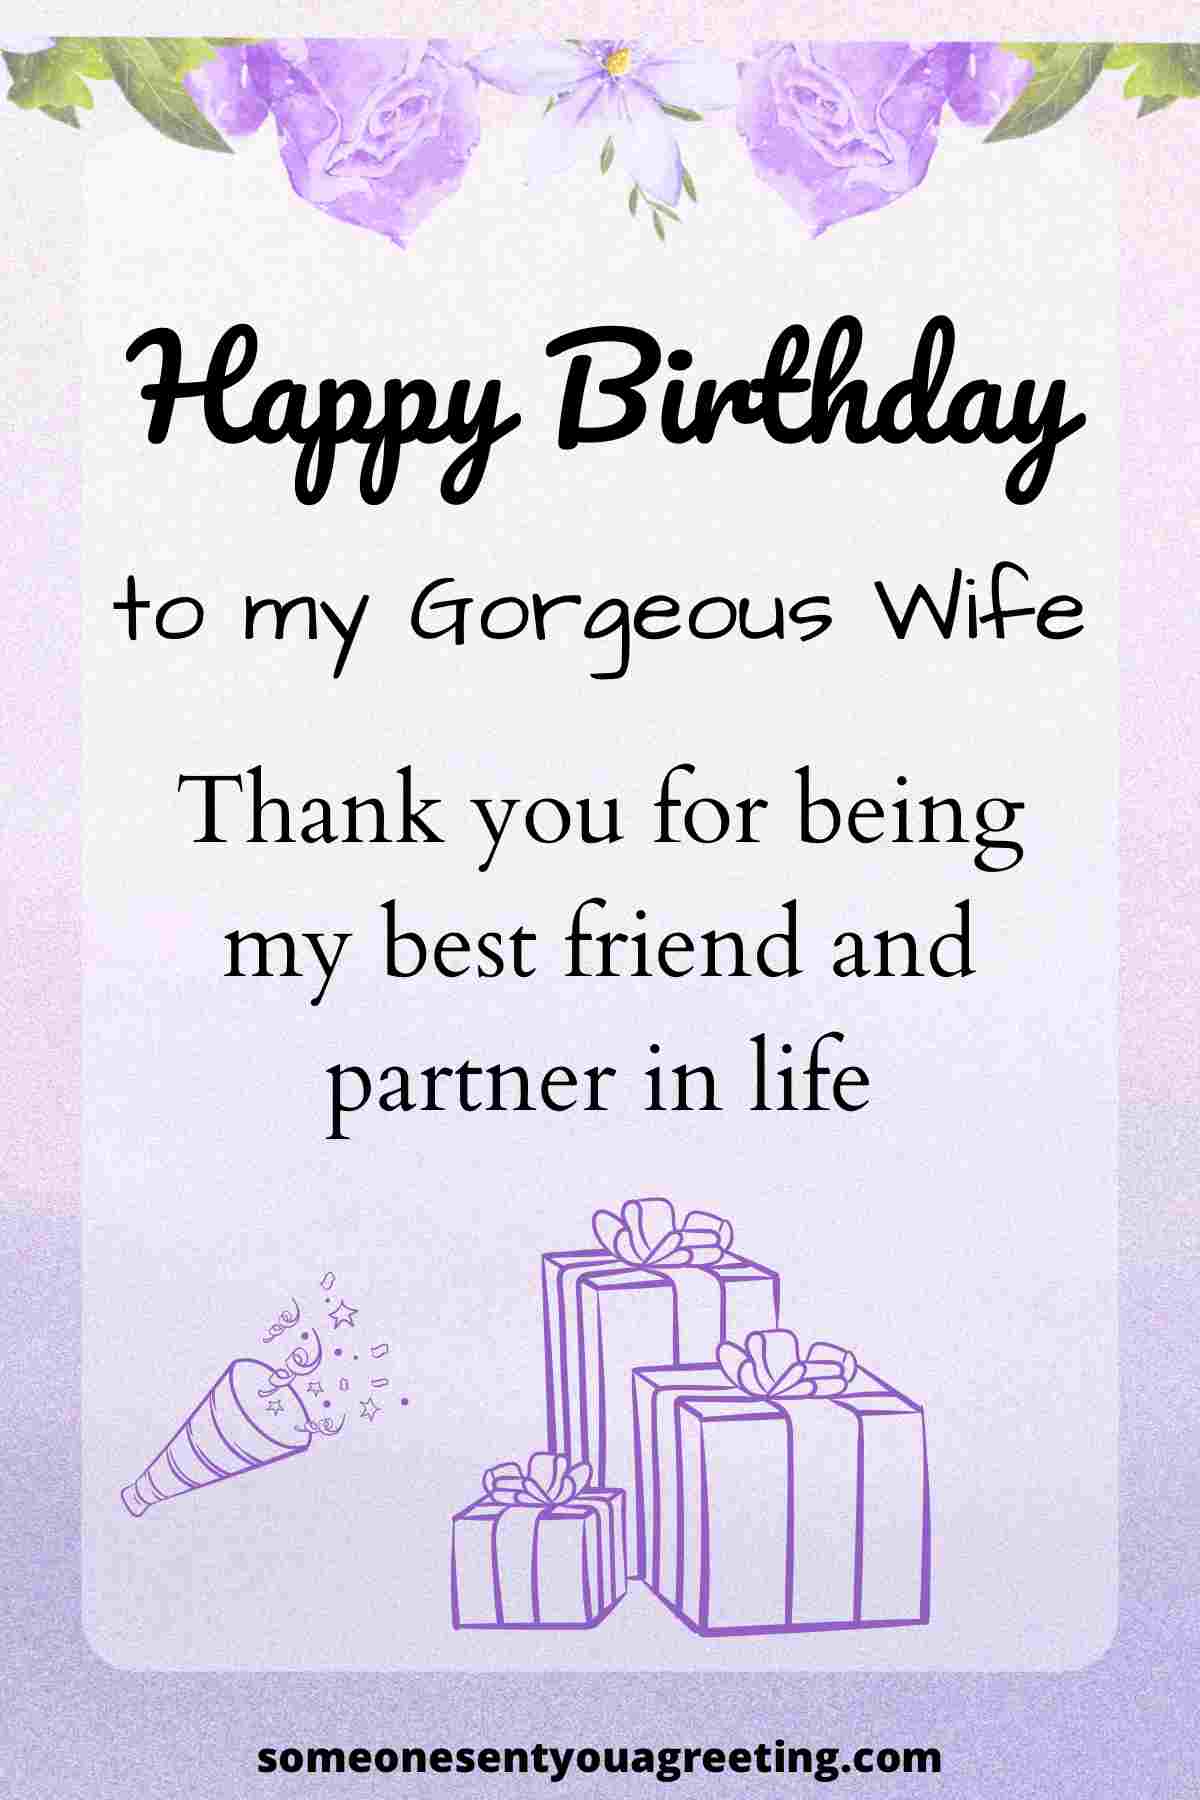 a happy birthday message for a wife